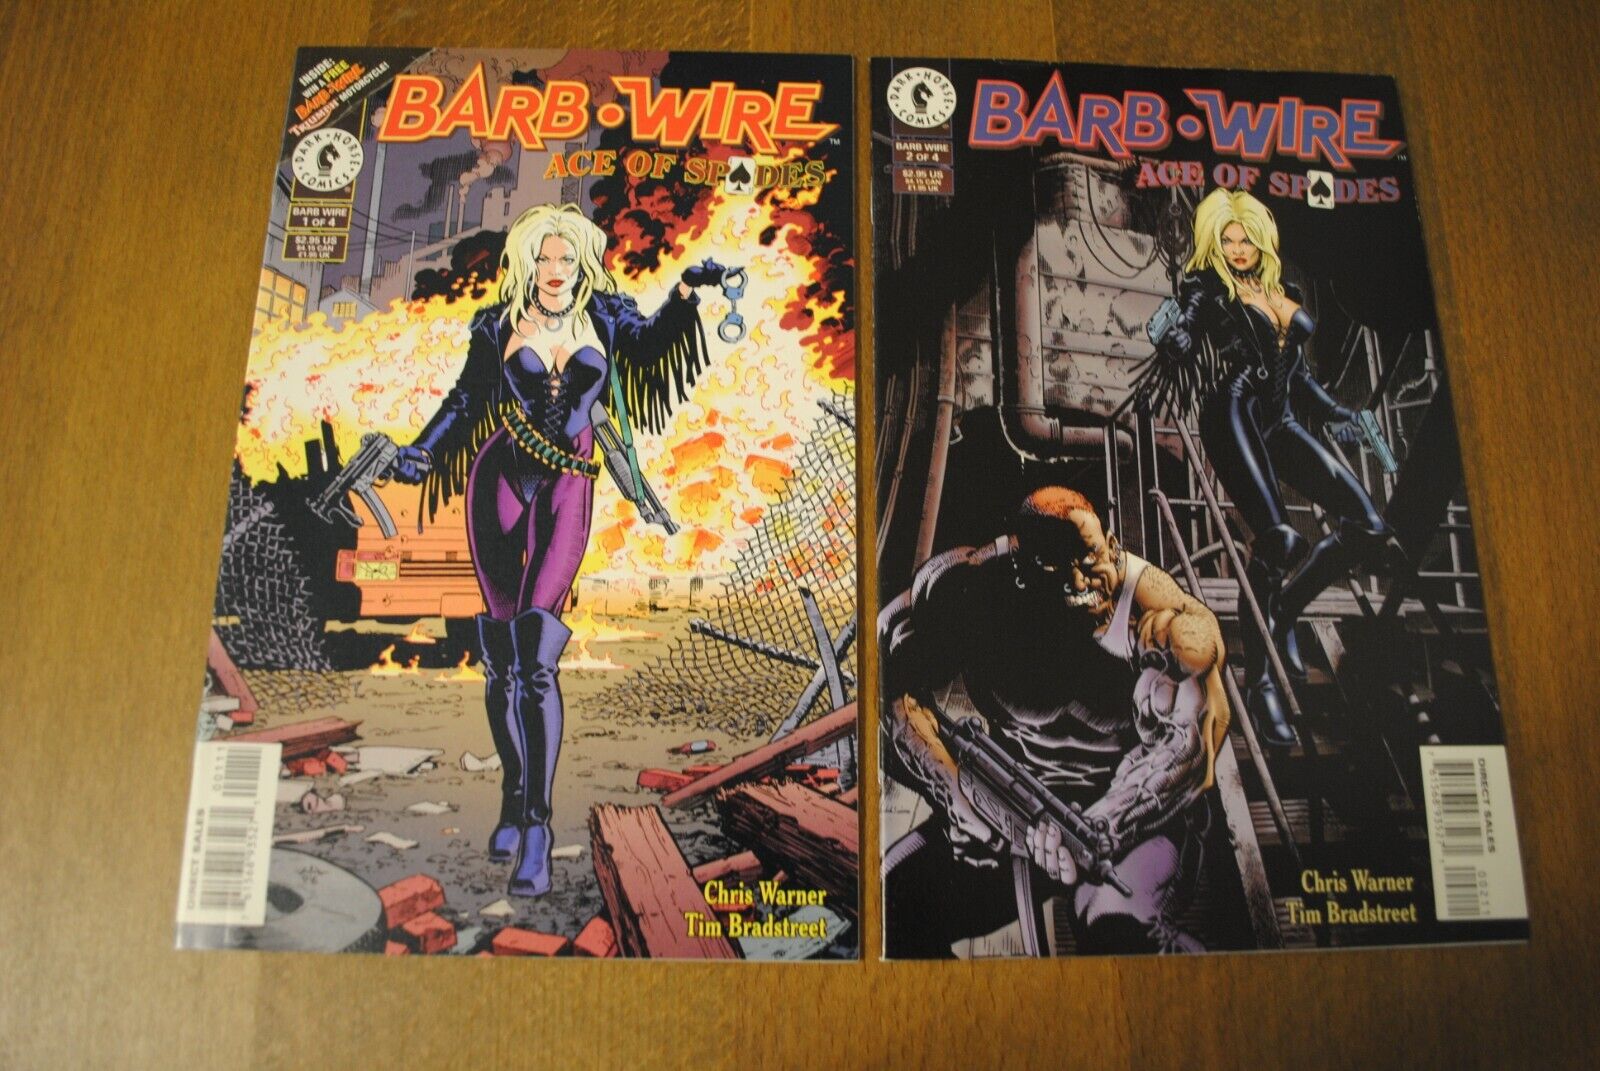 Barb Wire: Ace of Spades #1 and #2  (Dark Horse Comics May 1996) Never Read